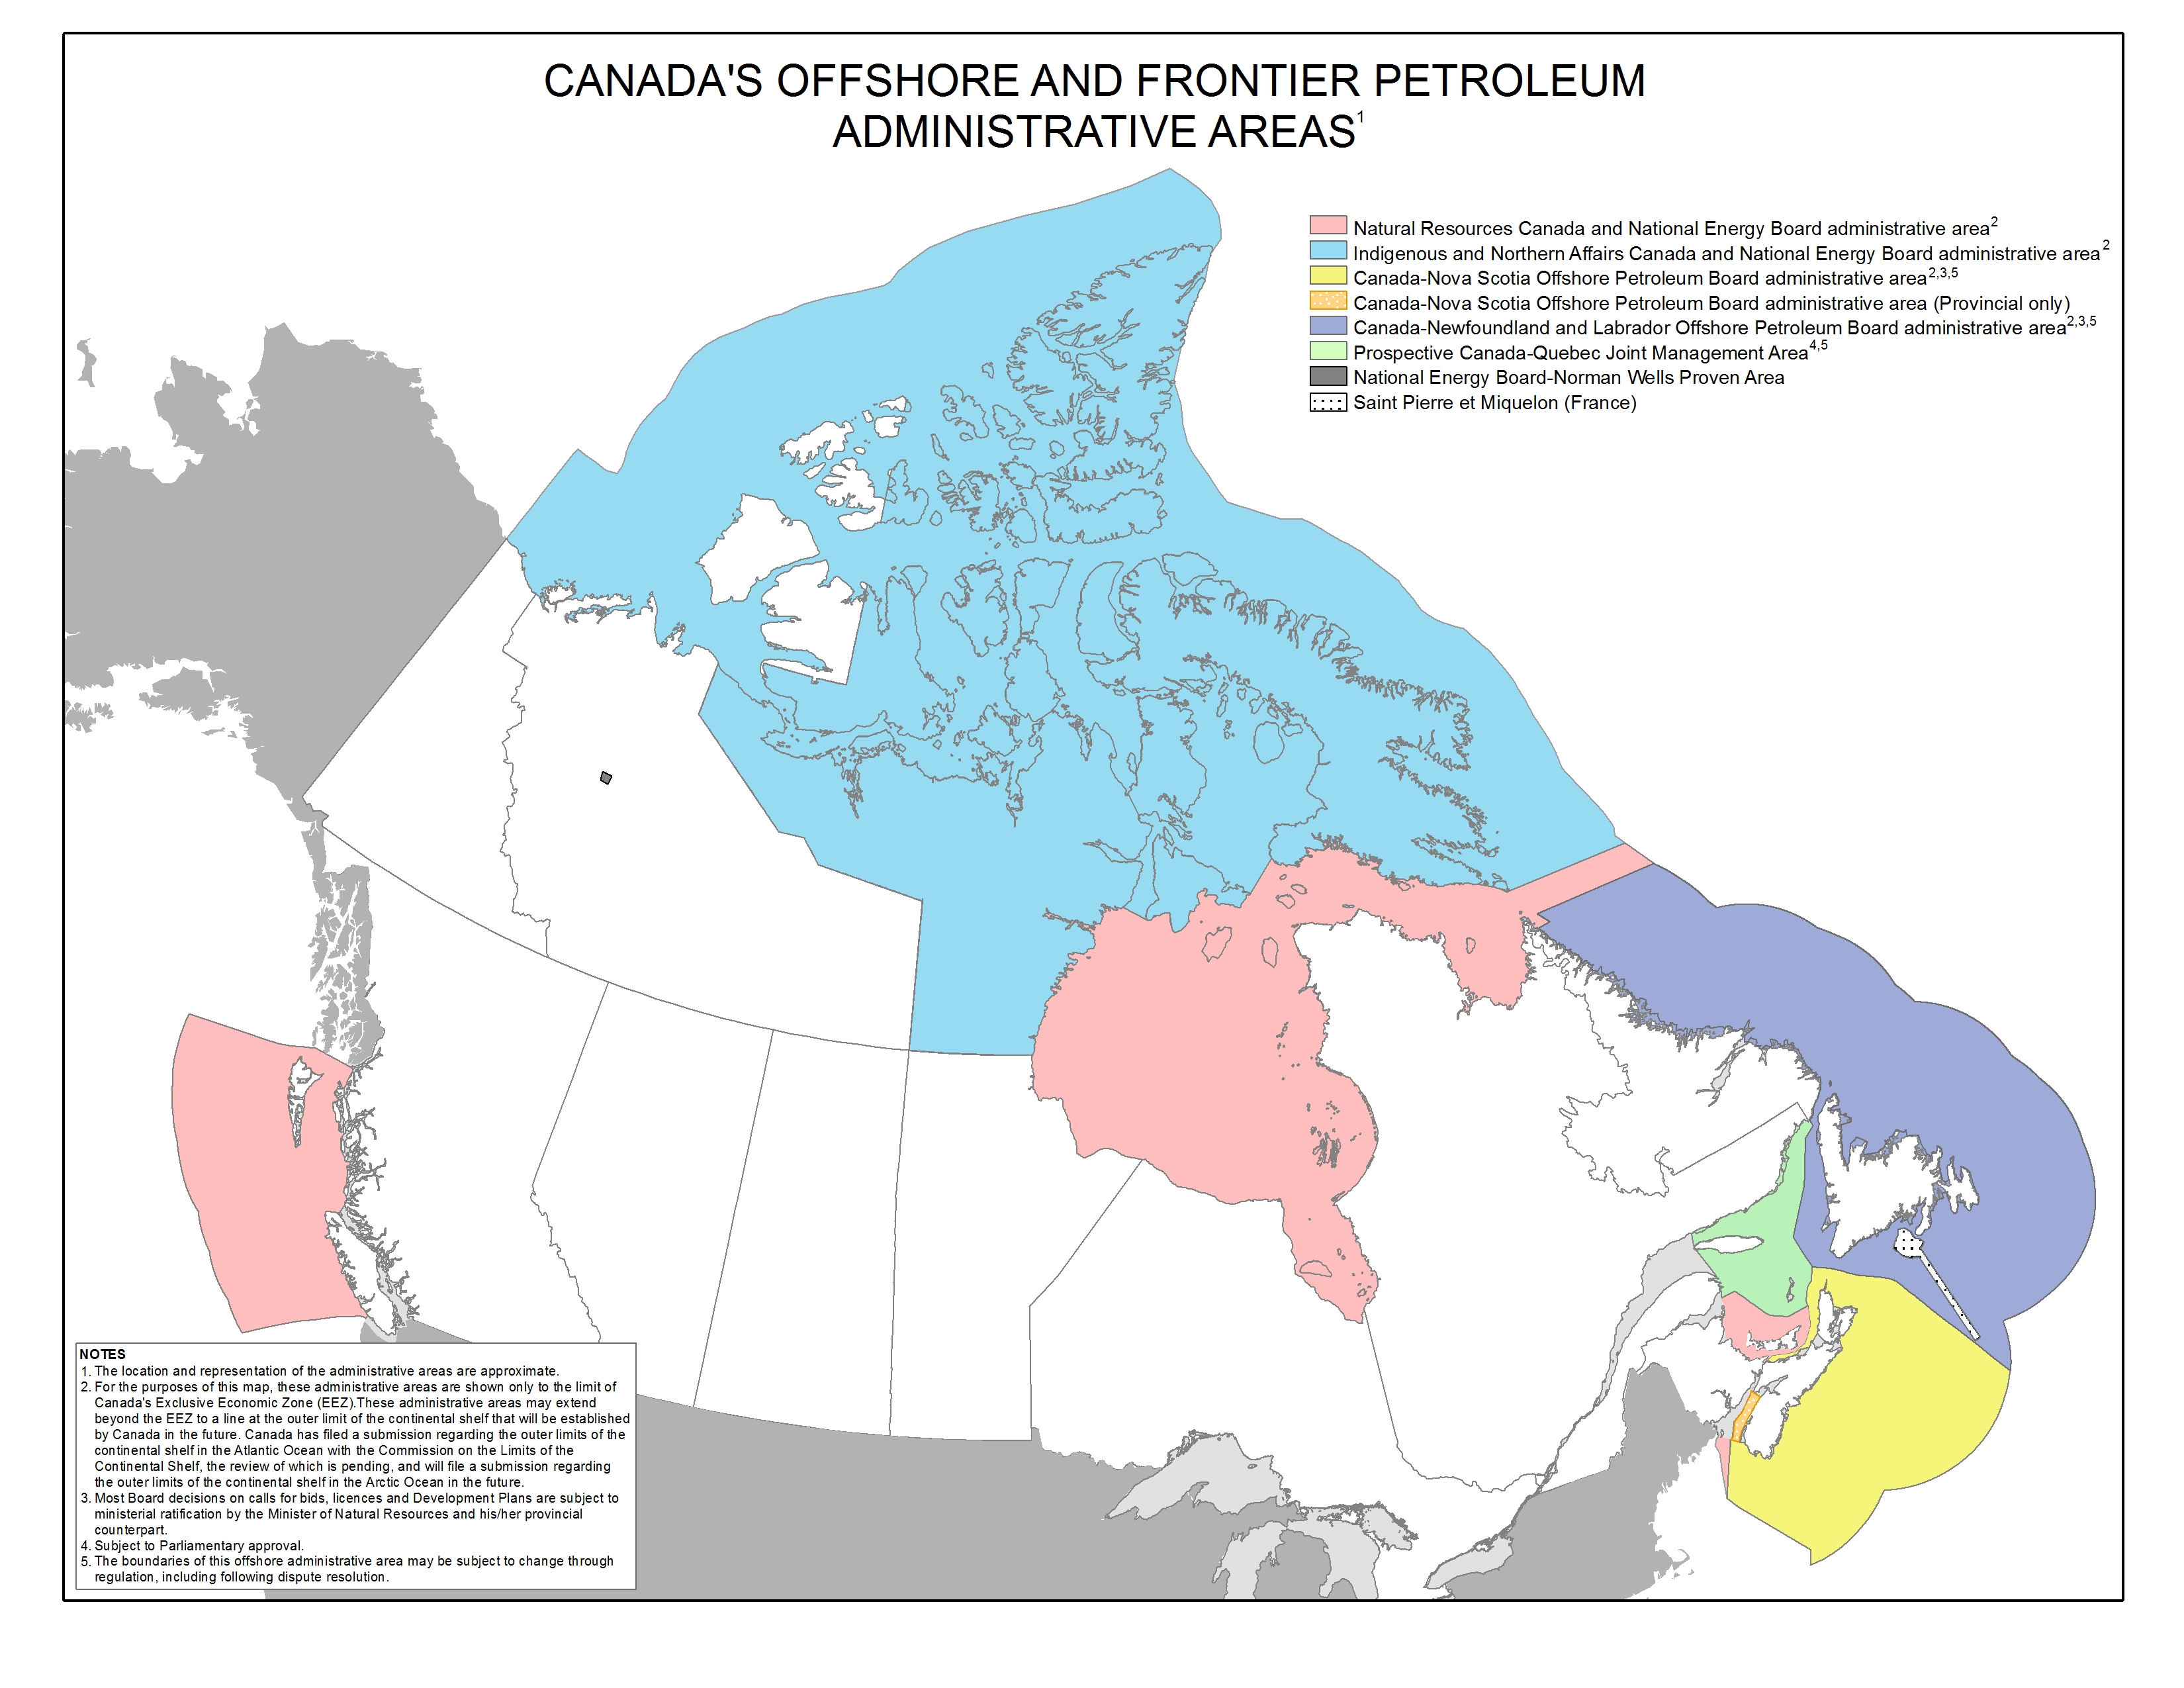 Offshore and Frontier Oil and Gas Jurisdictions in Canada